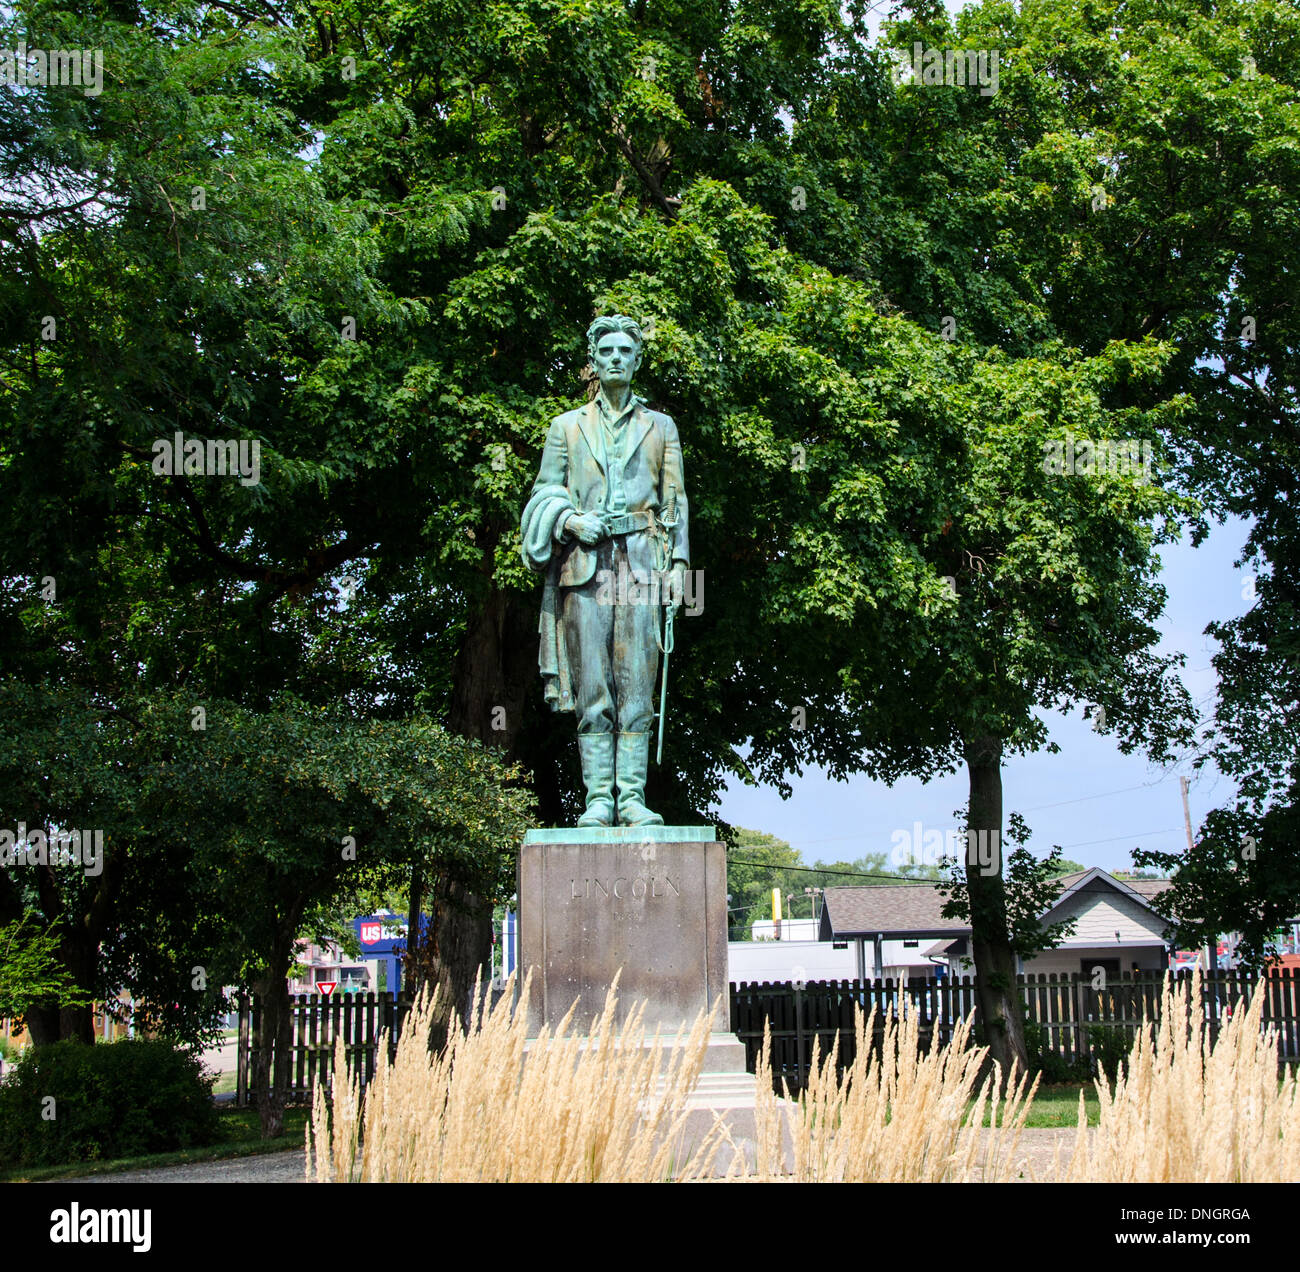 Statue of Abraham Lincoln in Black Hawk War uniform in Dixon, Illinois, a town along the Lincoln Highway. Stock Photo